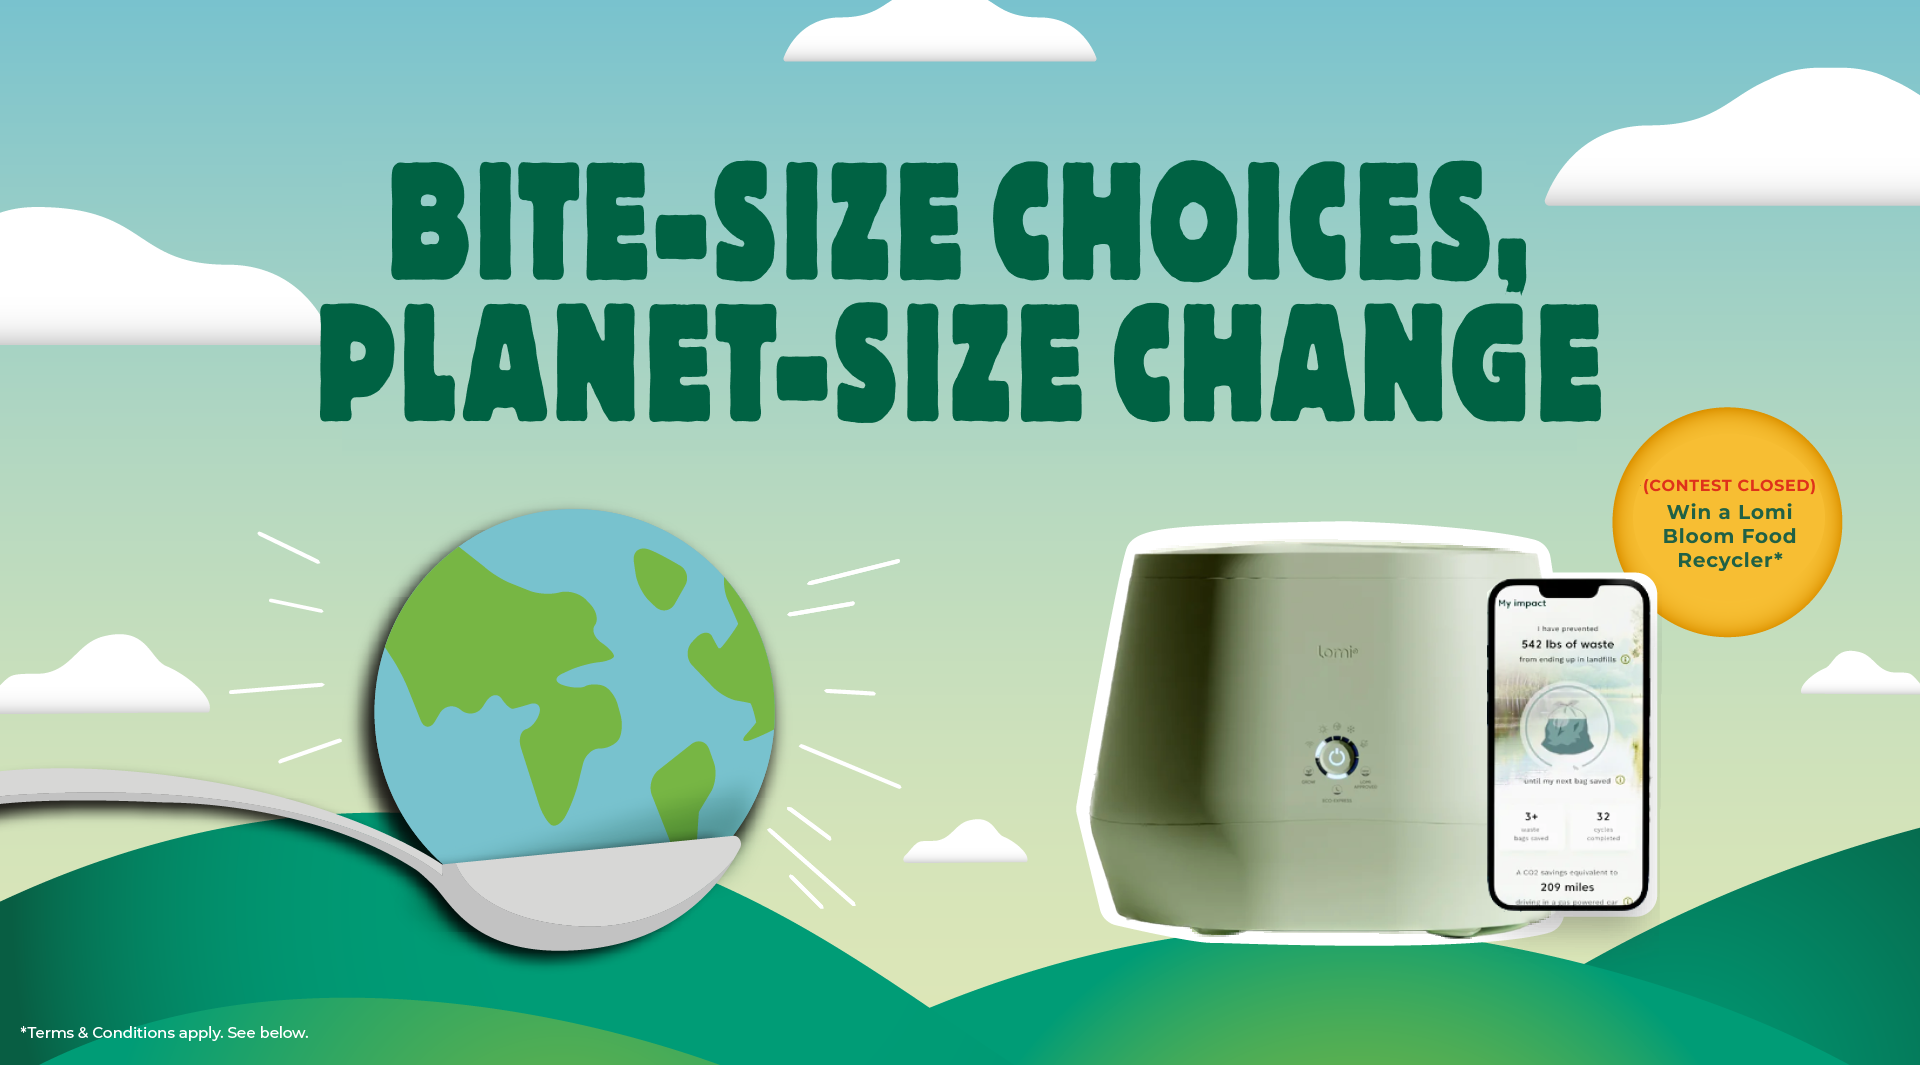 Promotional eco-friendly advertisement featuring Earth and a food recycler with the text 'Bite-Size Choices, Planet-Size Change.'